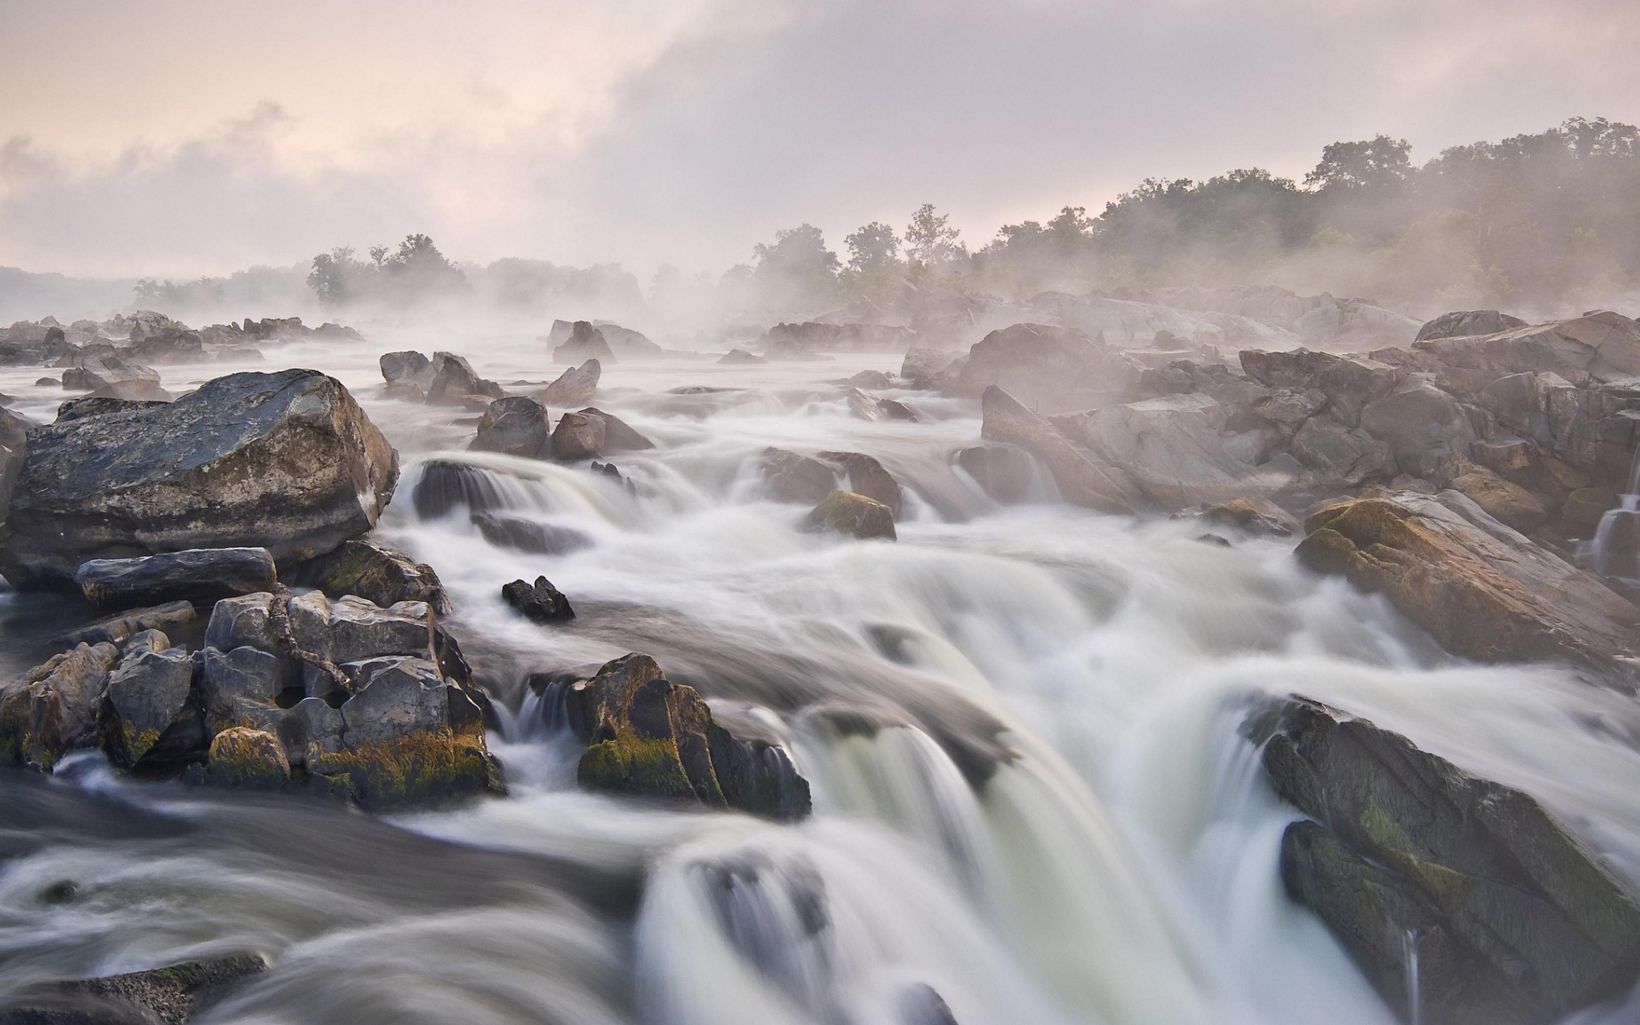 White water rushes over large rocks to create a series of short falls on the Potomac River. Fog rises from the water in the early morning obscuring the tree lined banks.